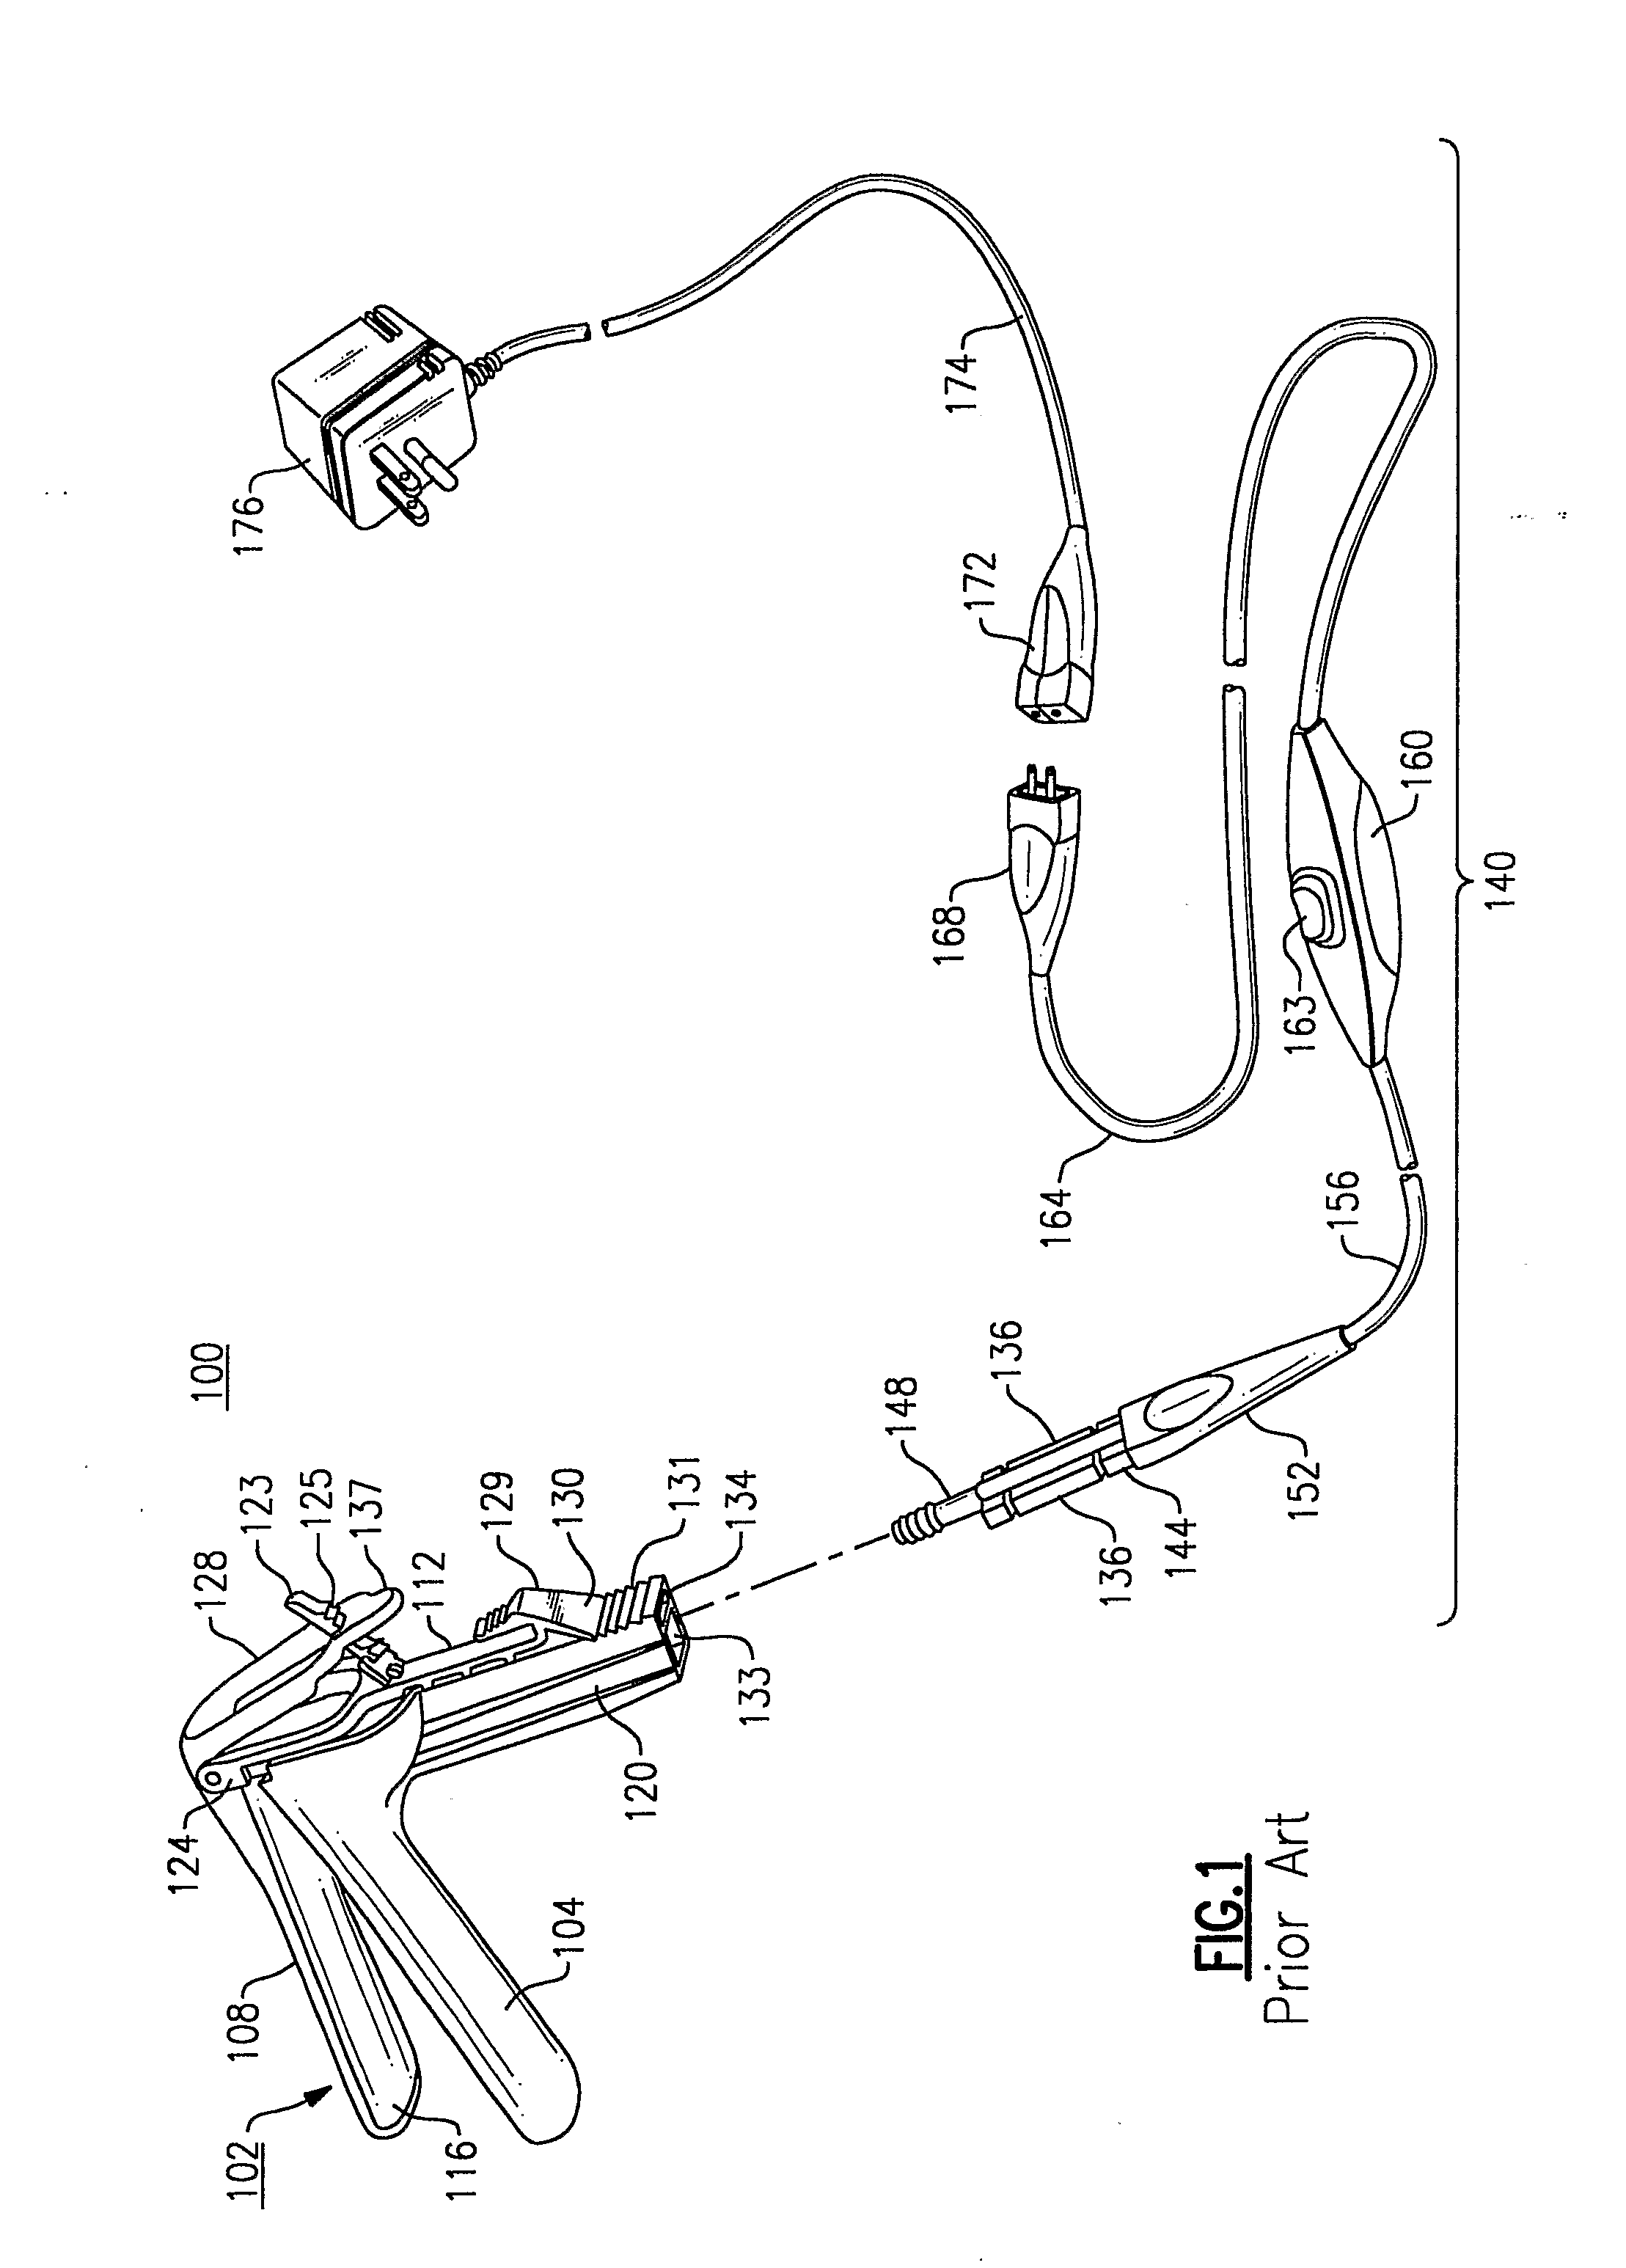 Illumination Assembly For Use With Vaginal Speculum Apparatus